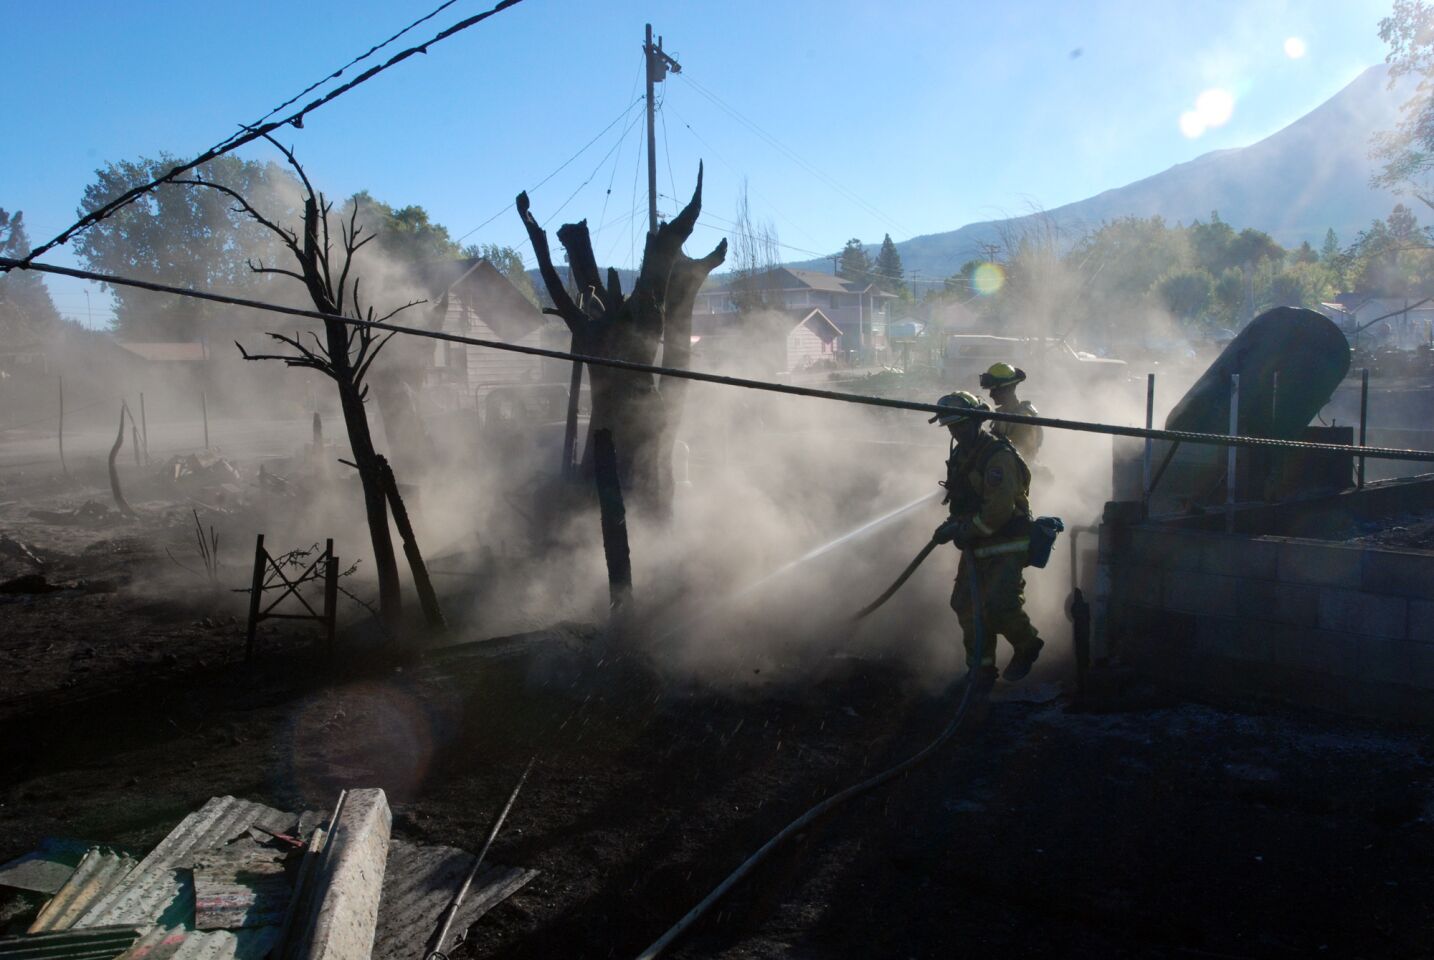 Firefighters hose down the smoldering remains of a home in Weed, Calif., on Tuesday.